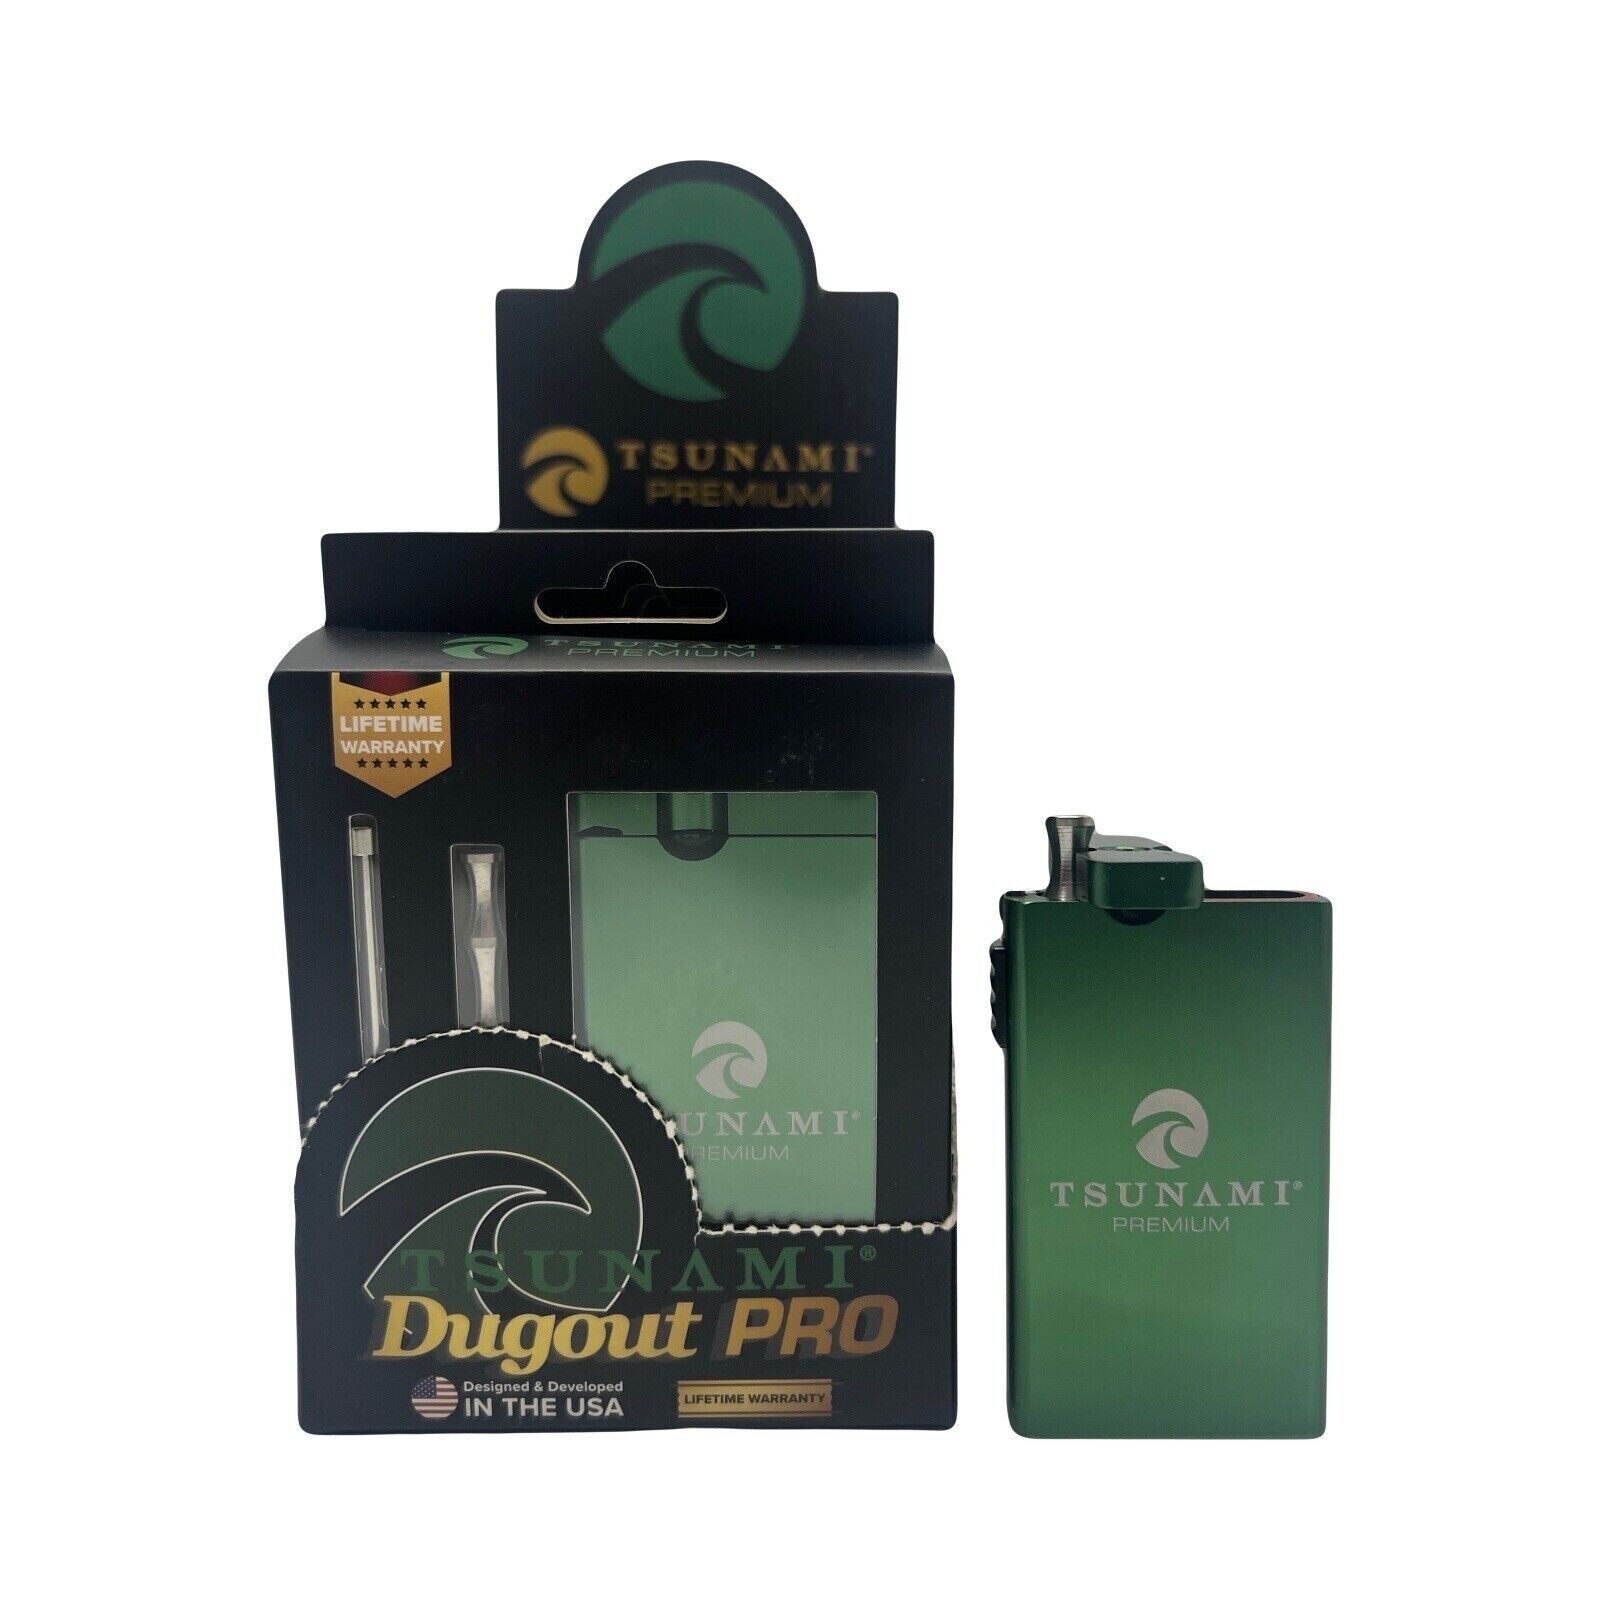 TSUNAMI Aluminum Dugout Pro with Taster Pipe, Poker, and Locking Lid - Green